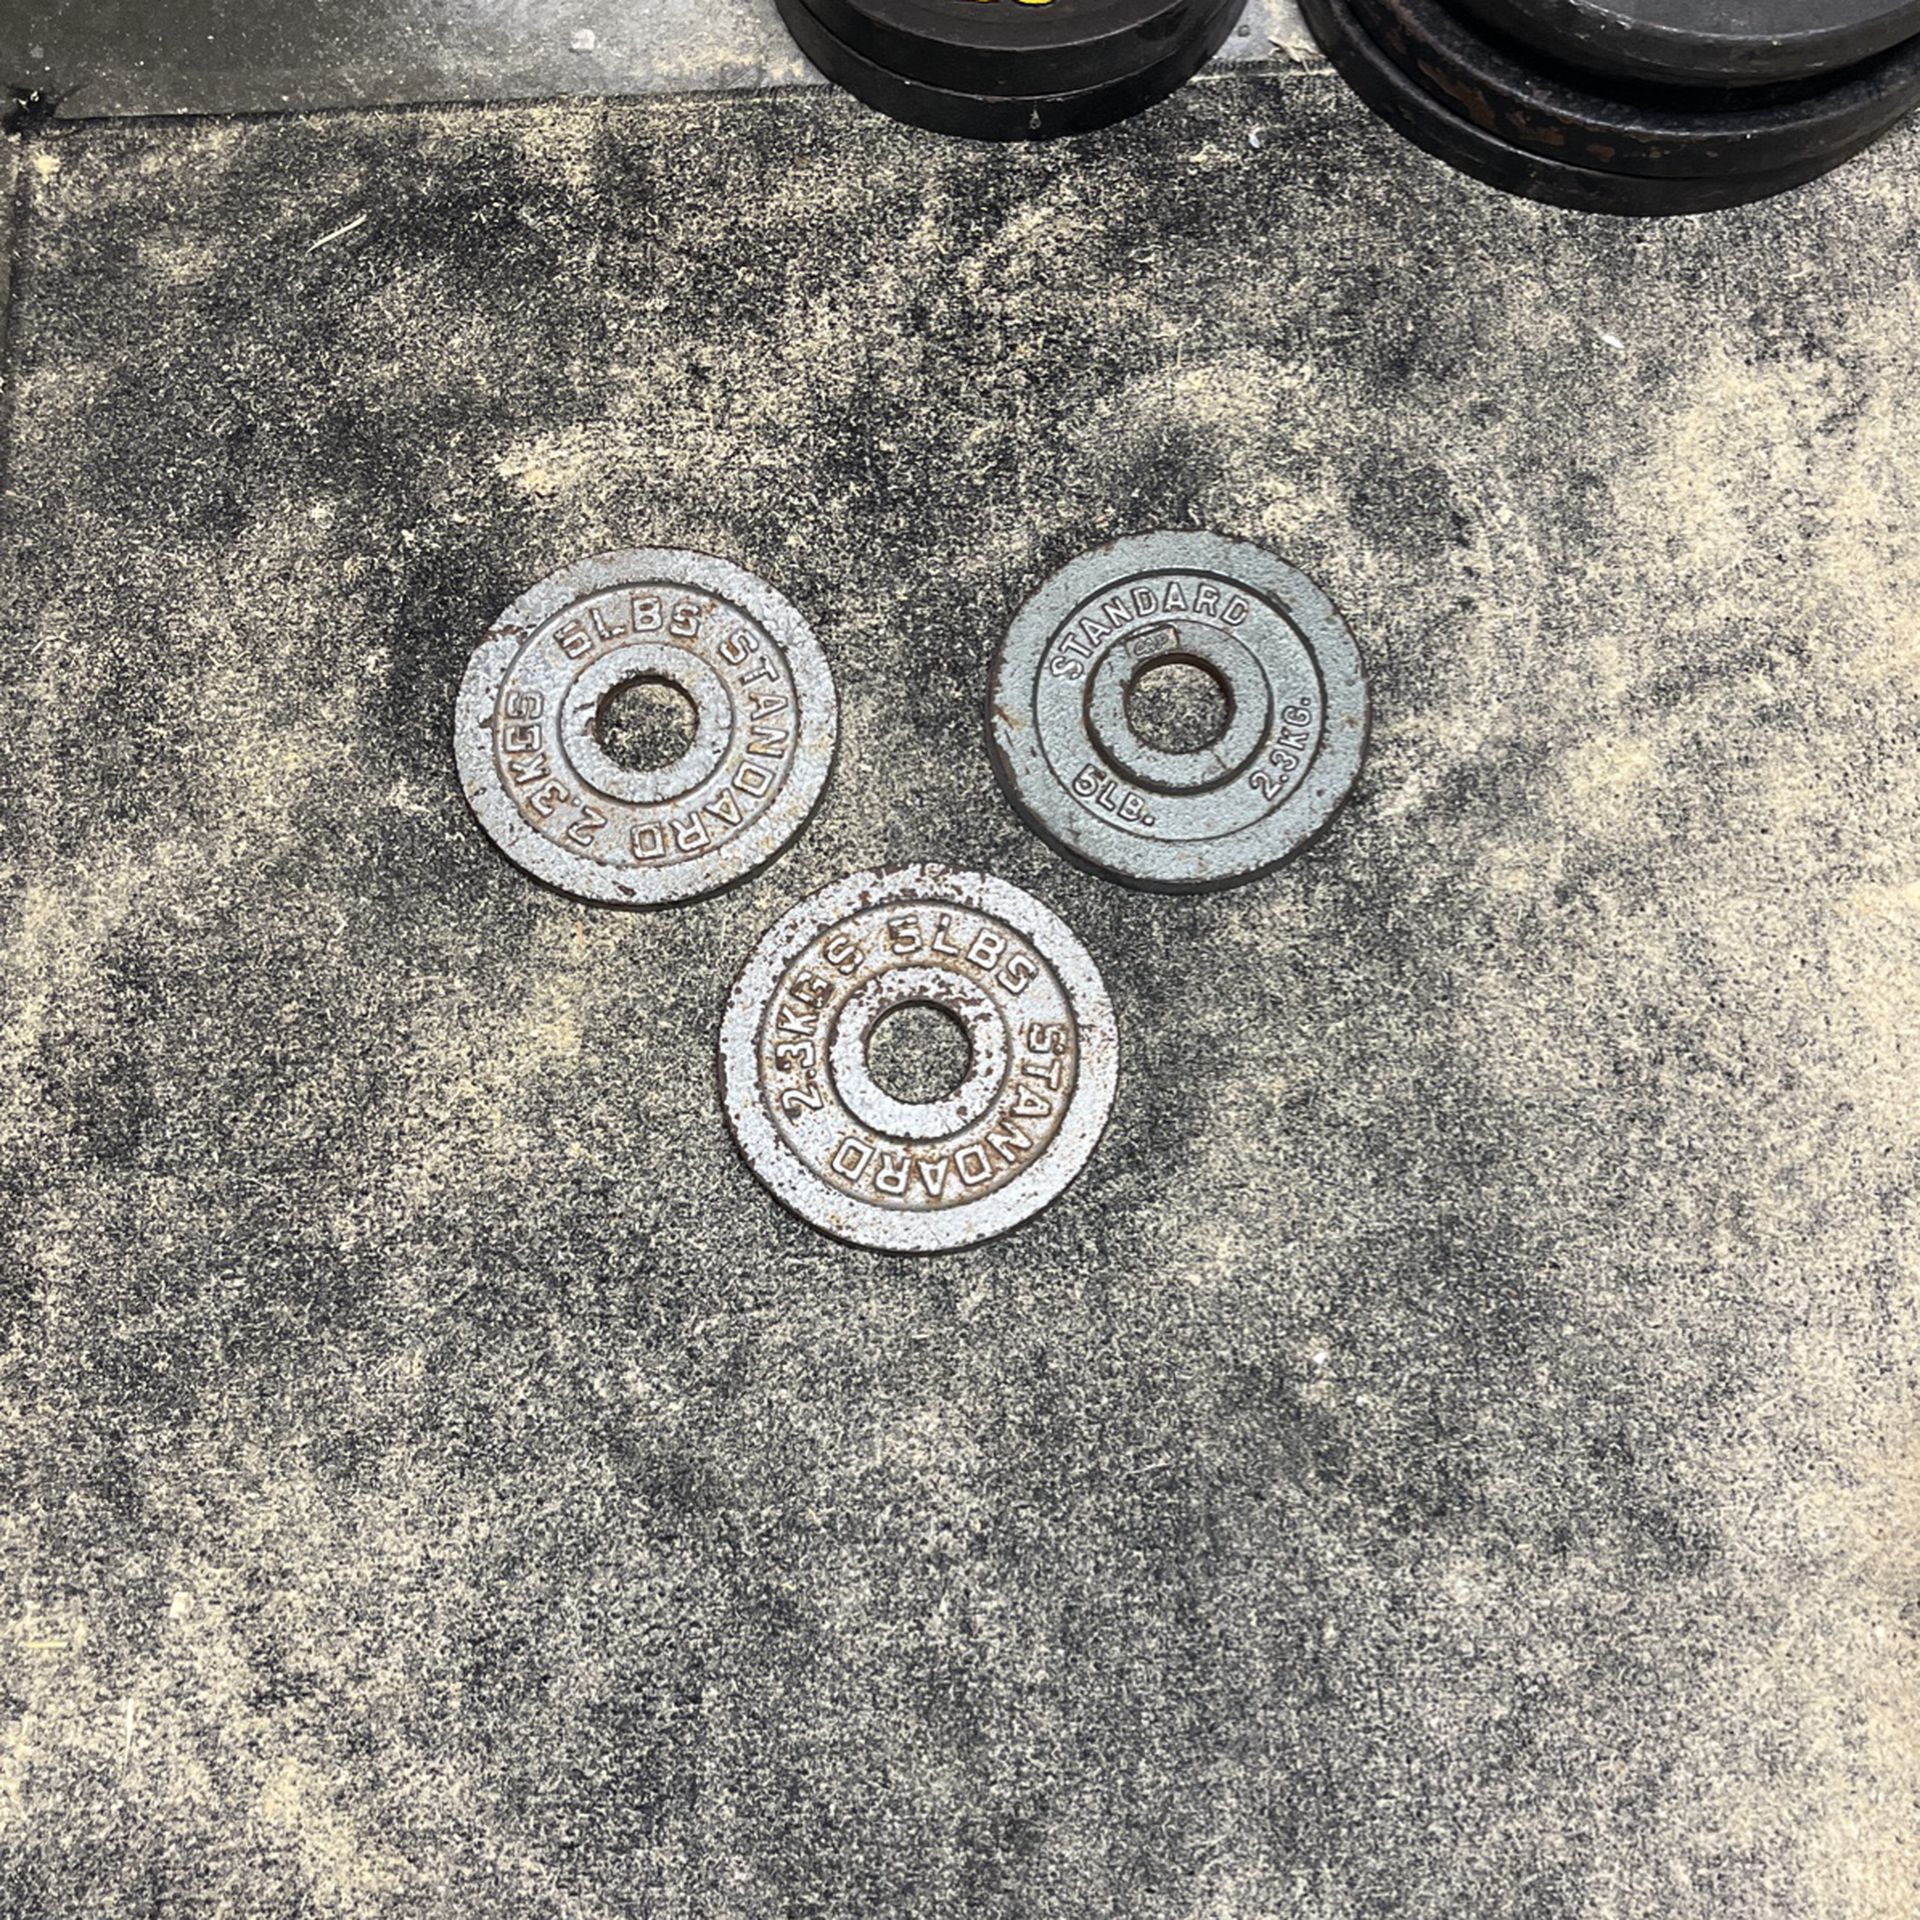 3 Five Pound Olympic Plates